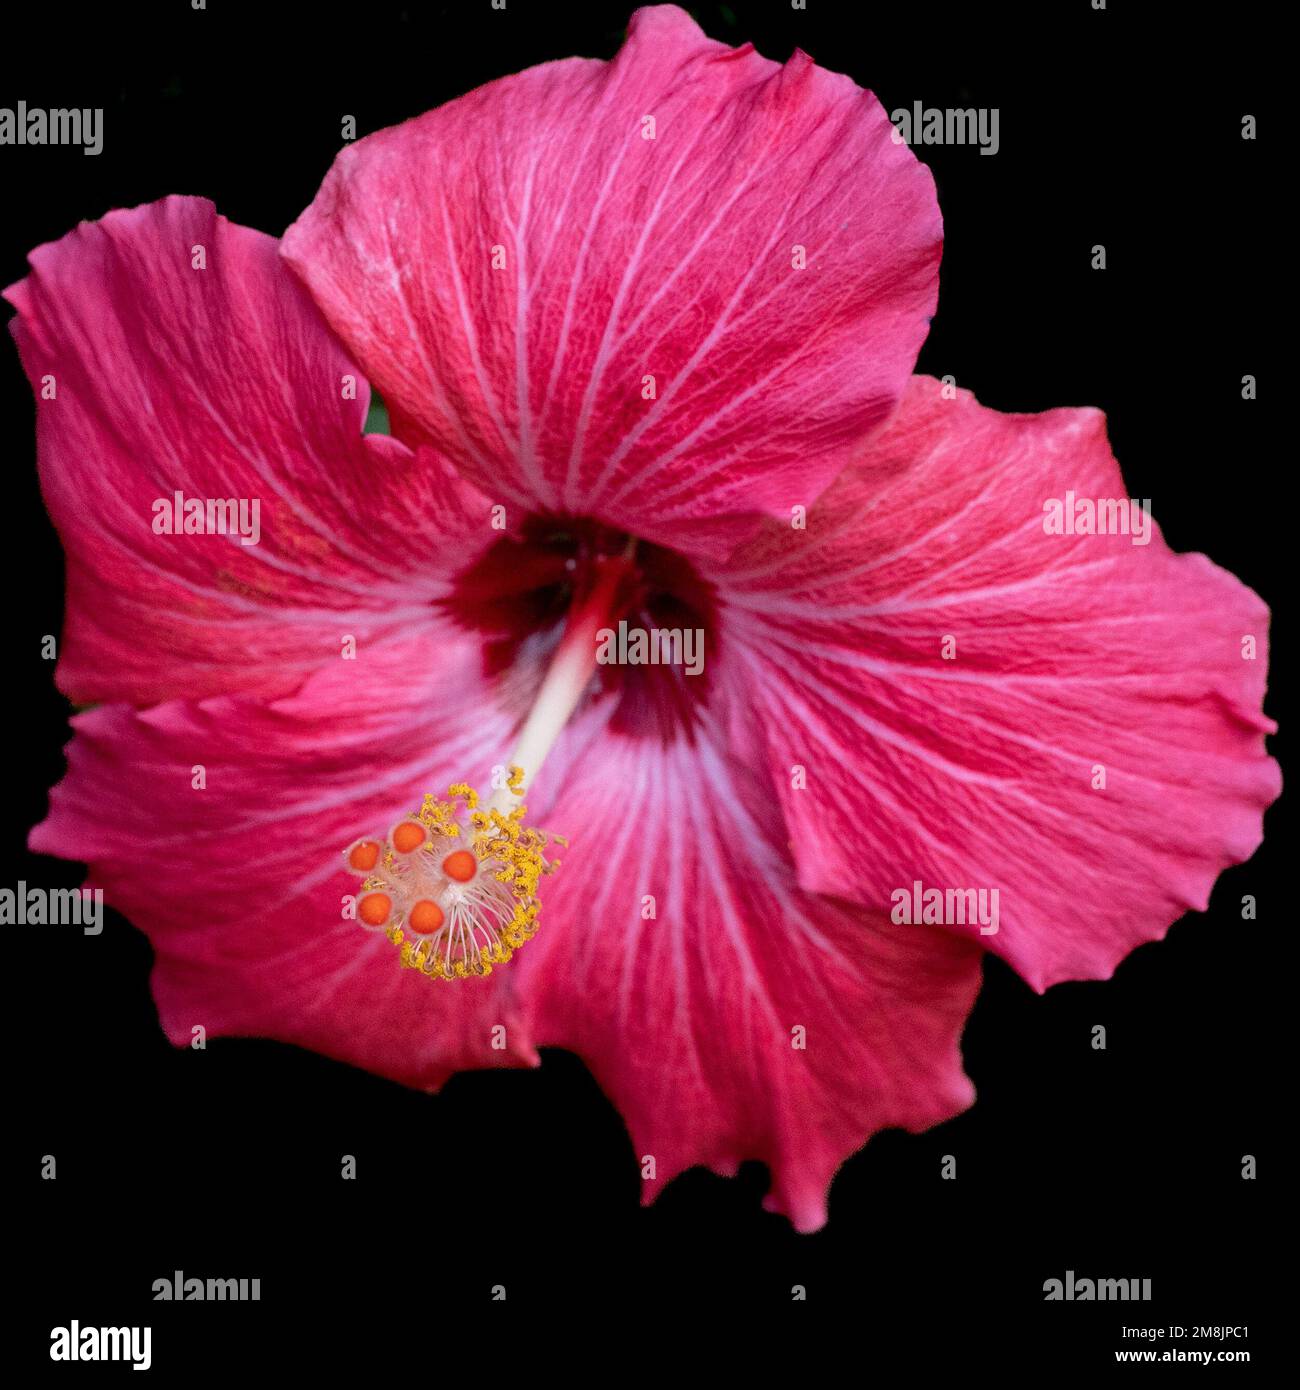 Hibiscus flower, red, viewed from the front, highlighting the stamen and pistils of the reproductive  structures, rosa-sinensis against black backgrou Stock Photo